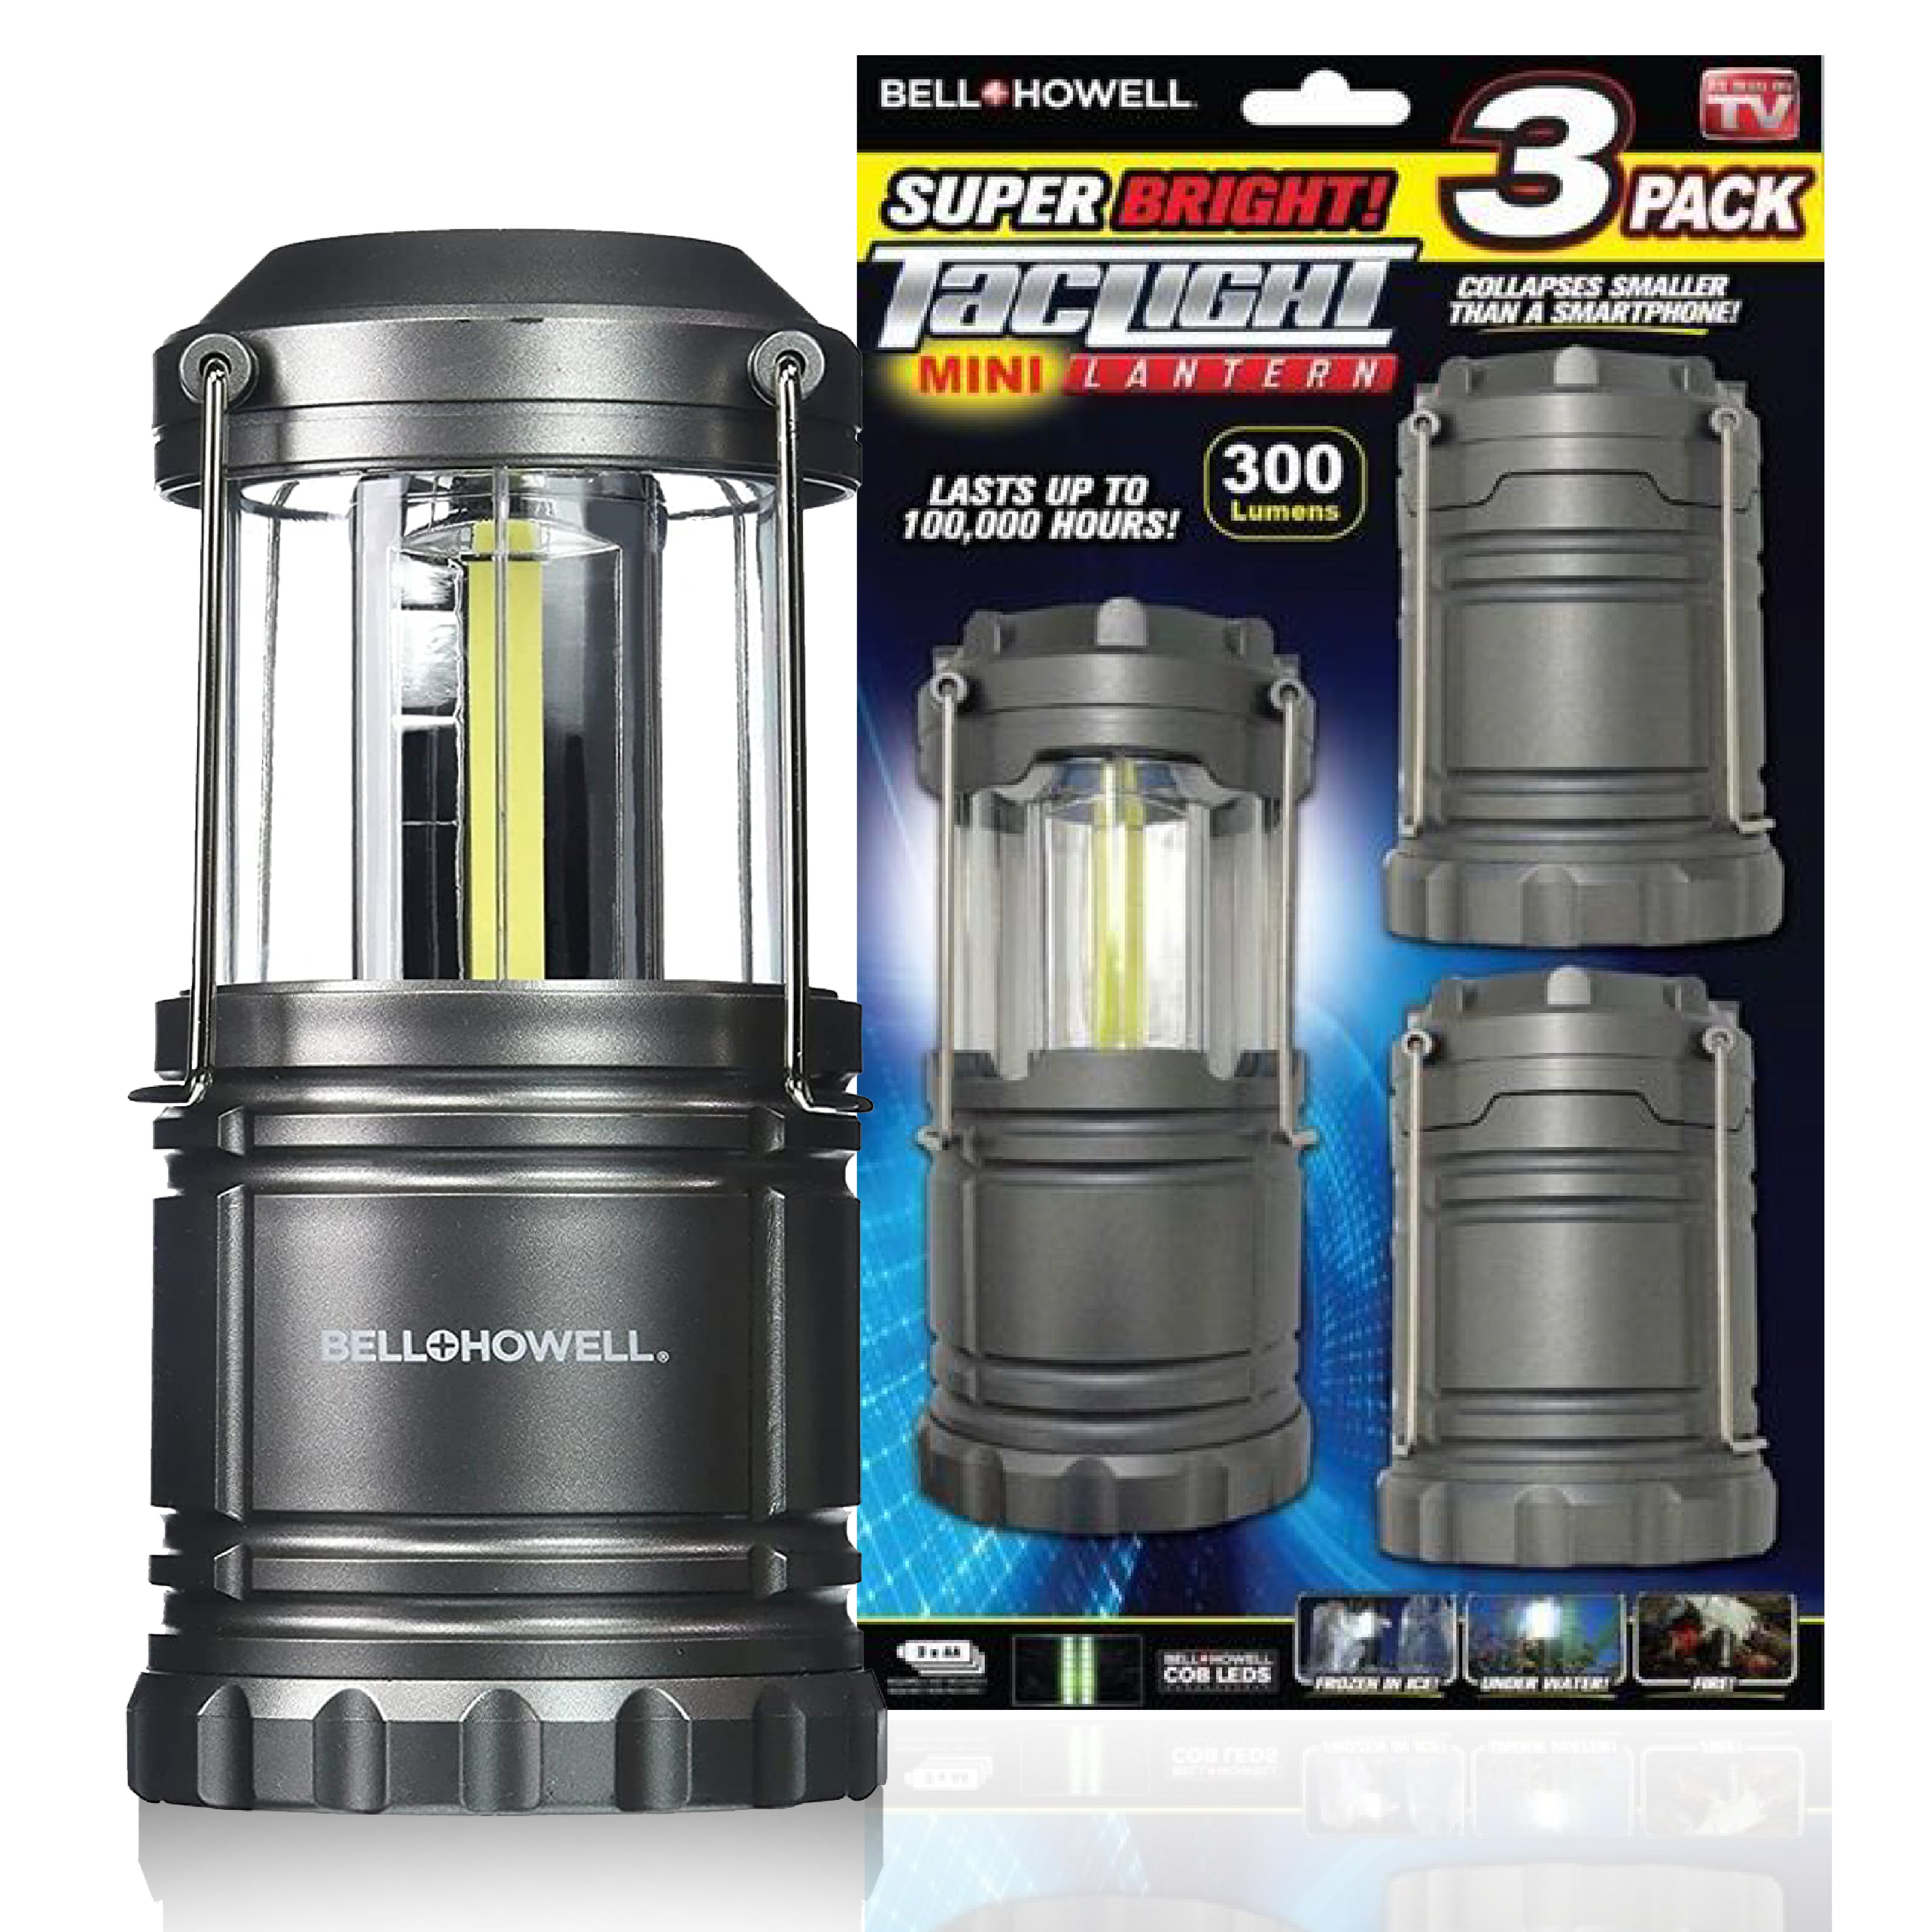 Bell + Howell Ultra Bright Taclight Mini Collaspible Lanterns 300 Lumens -  4 Pack